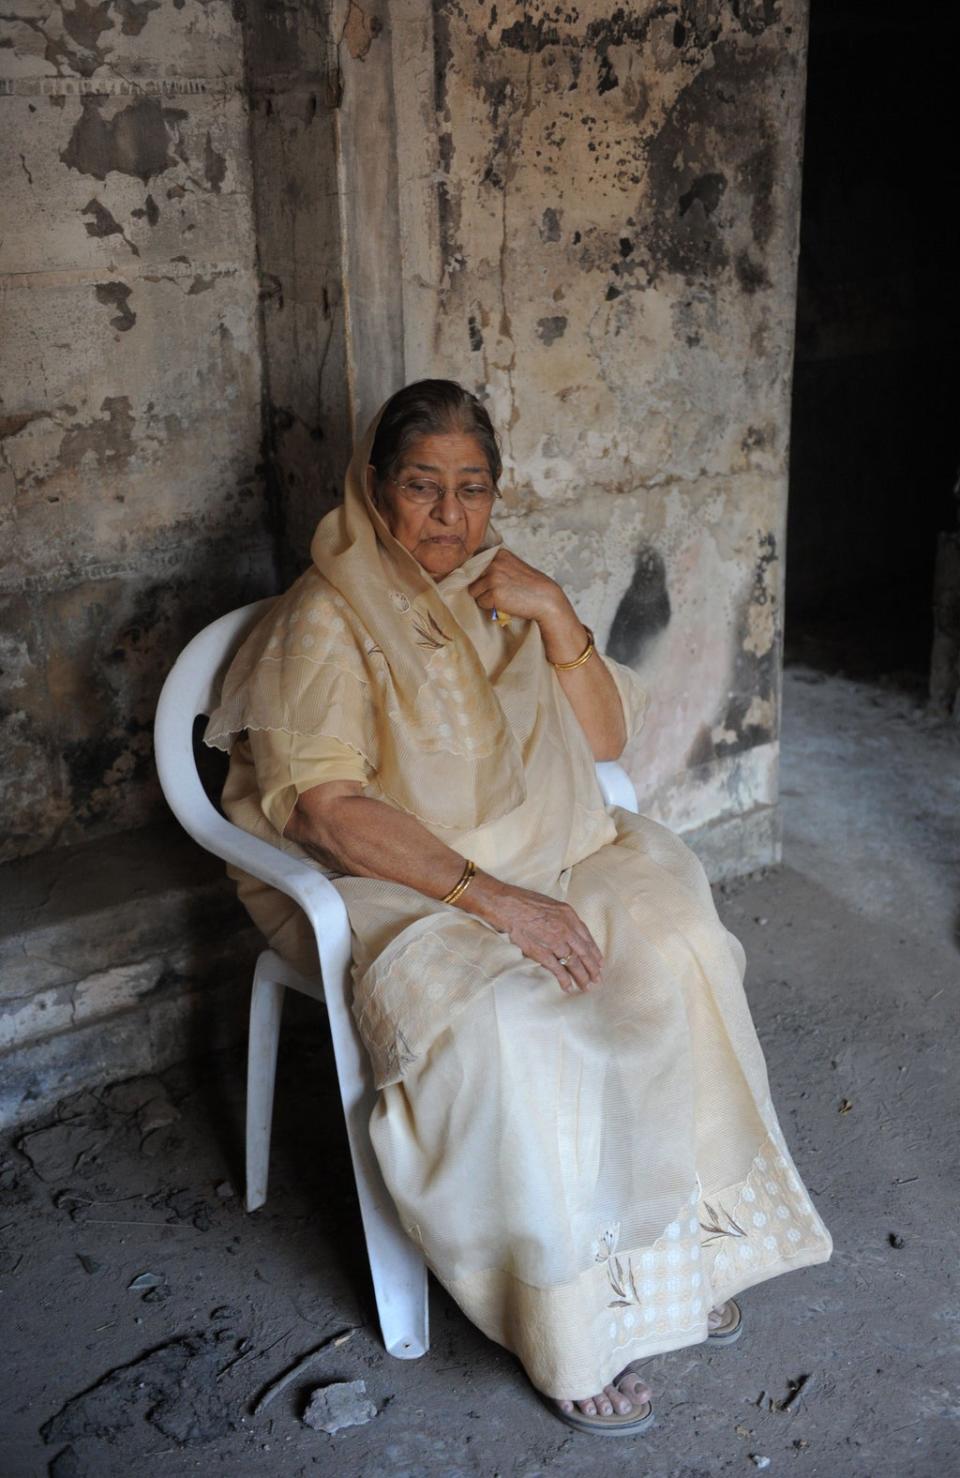 In this photograph taken on February 27, 2012 Zakia Jafri sits inside the remains of her former residence which was torched during the 2002 massacre at the Gulberg Society in Ahmedabad. (AFP via Getty Images)